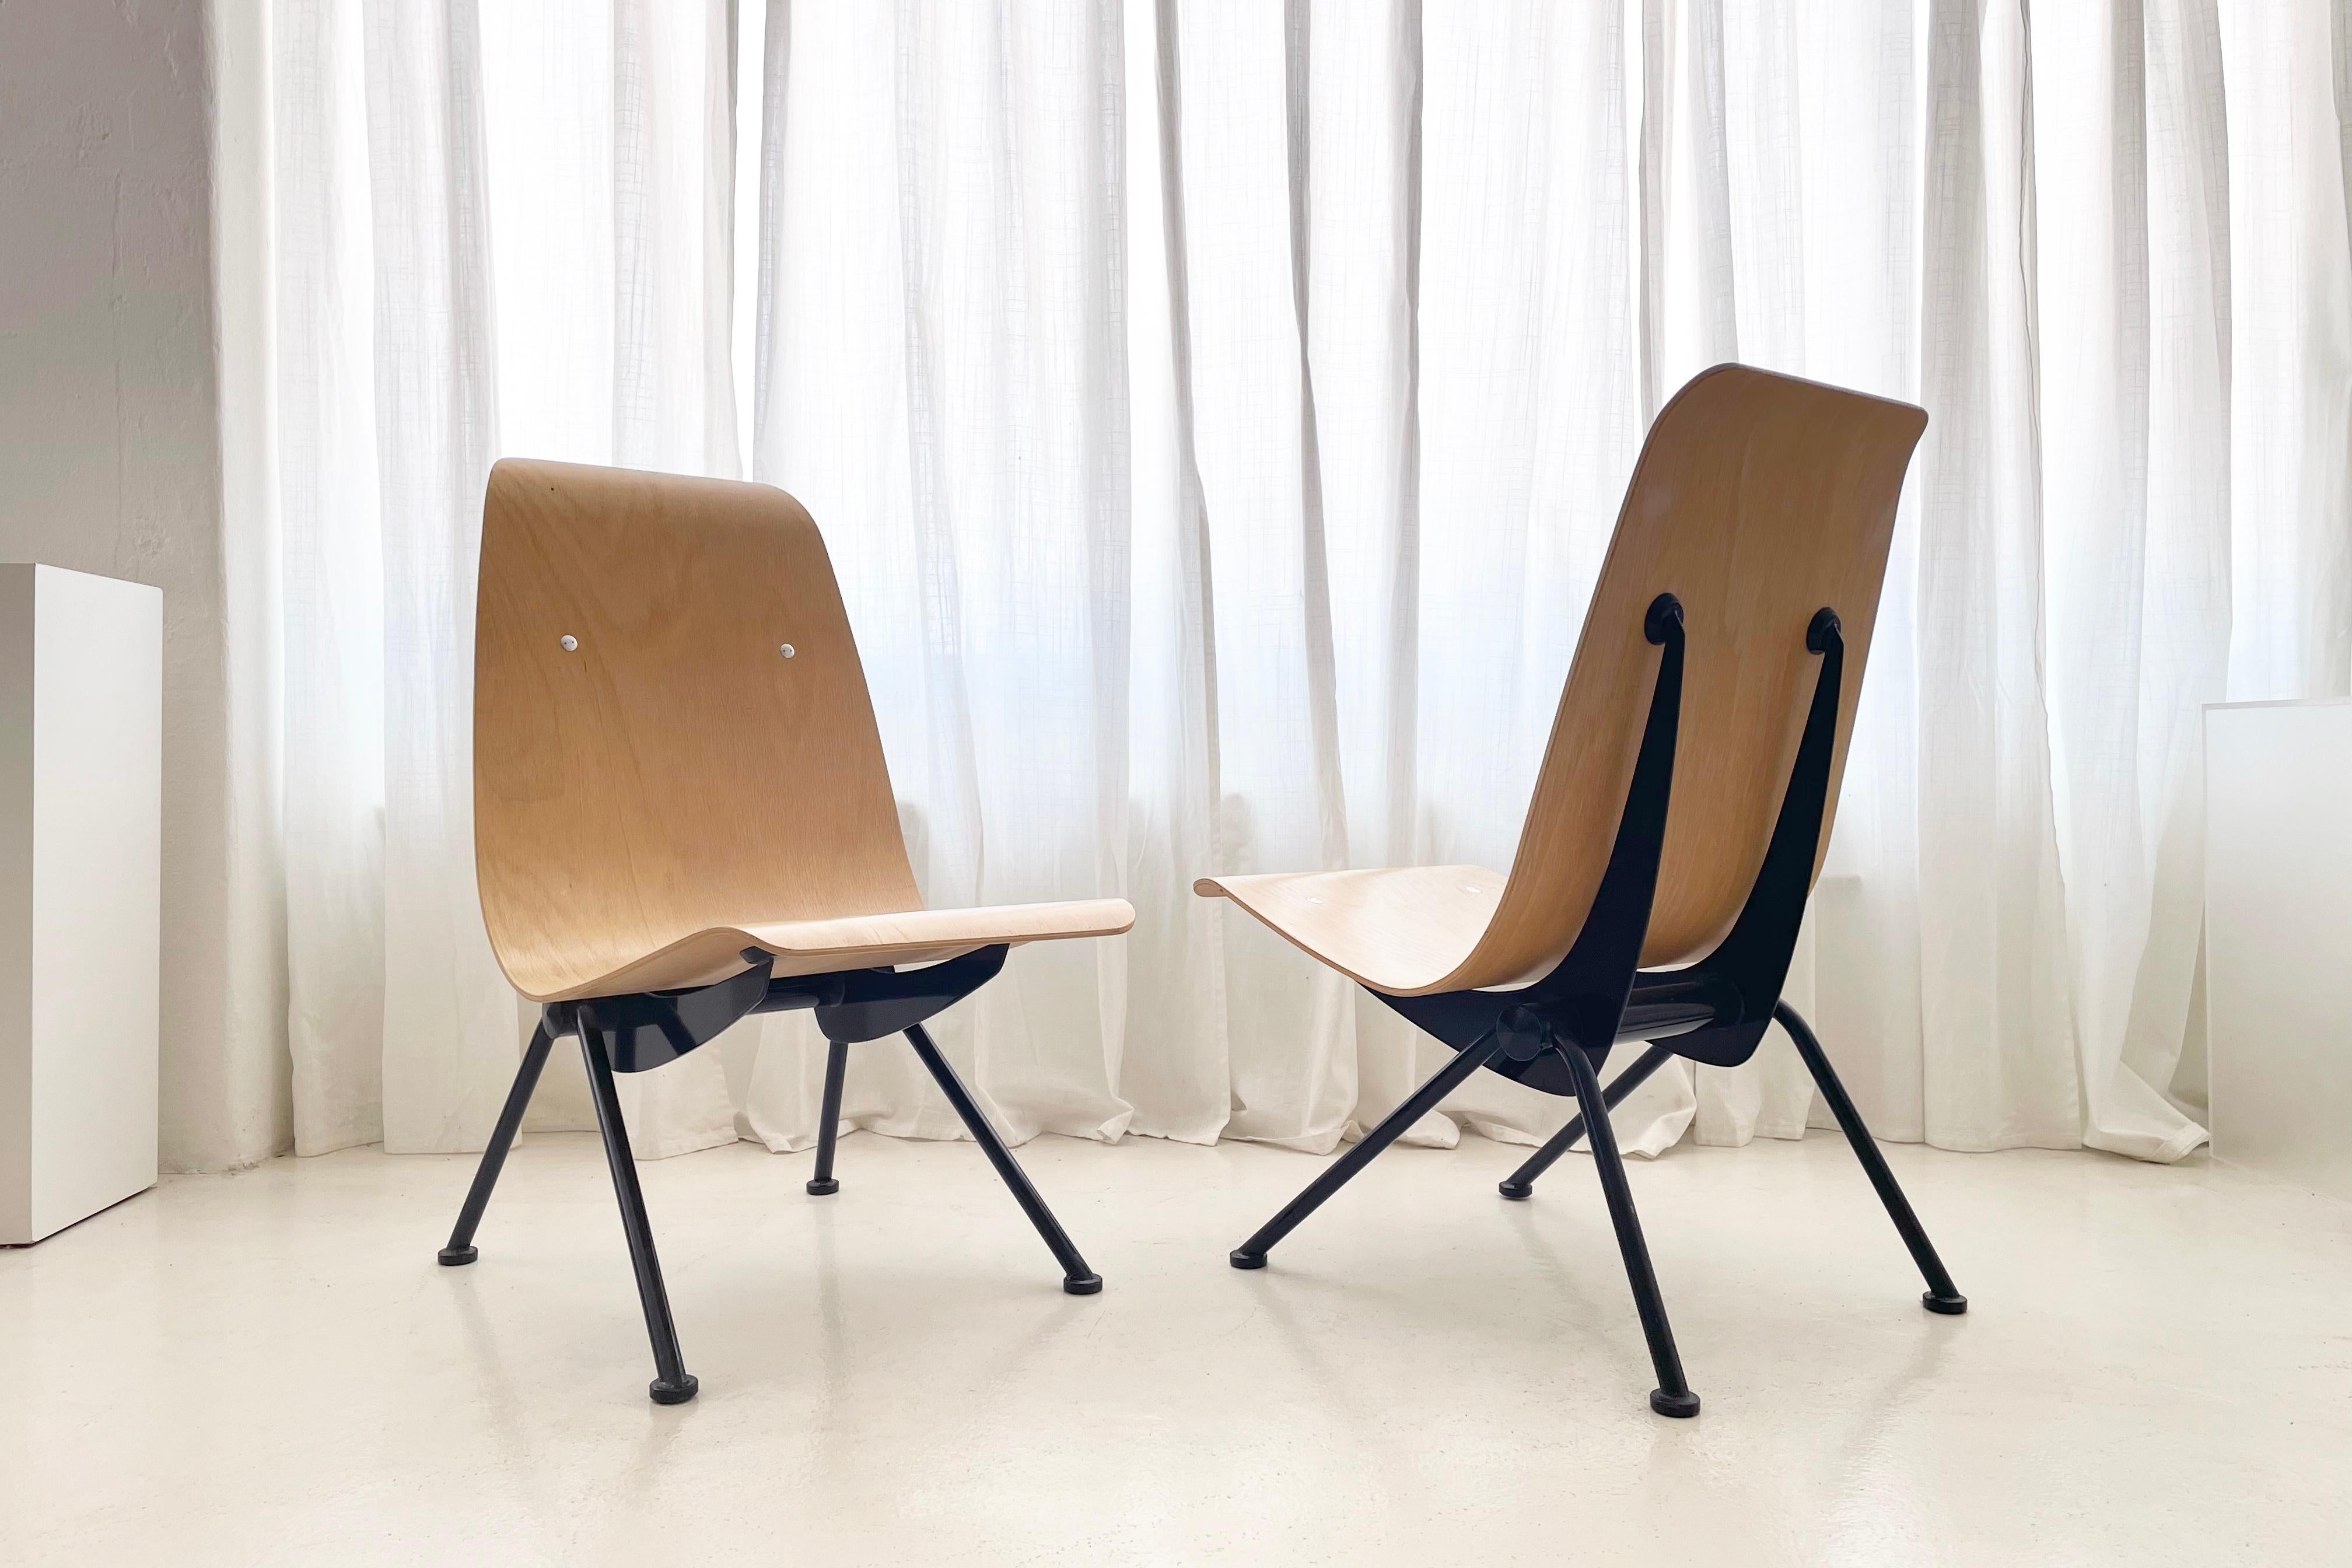 These chairs are a very sought after set of Antony Chairs originally designed in 1950 by French Architect Jean Prouvé, released via license by Vitra USA on behalf of the Prouvé family in 2002.

The chairs were re-released in a limited number and are